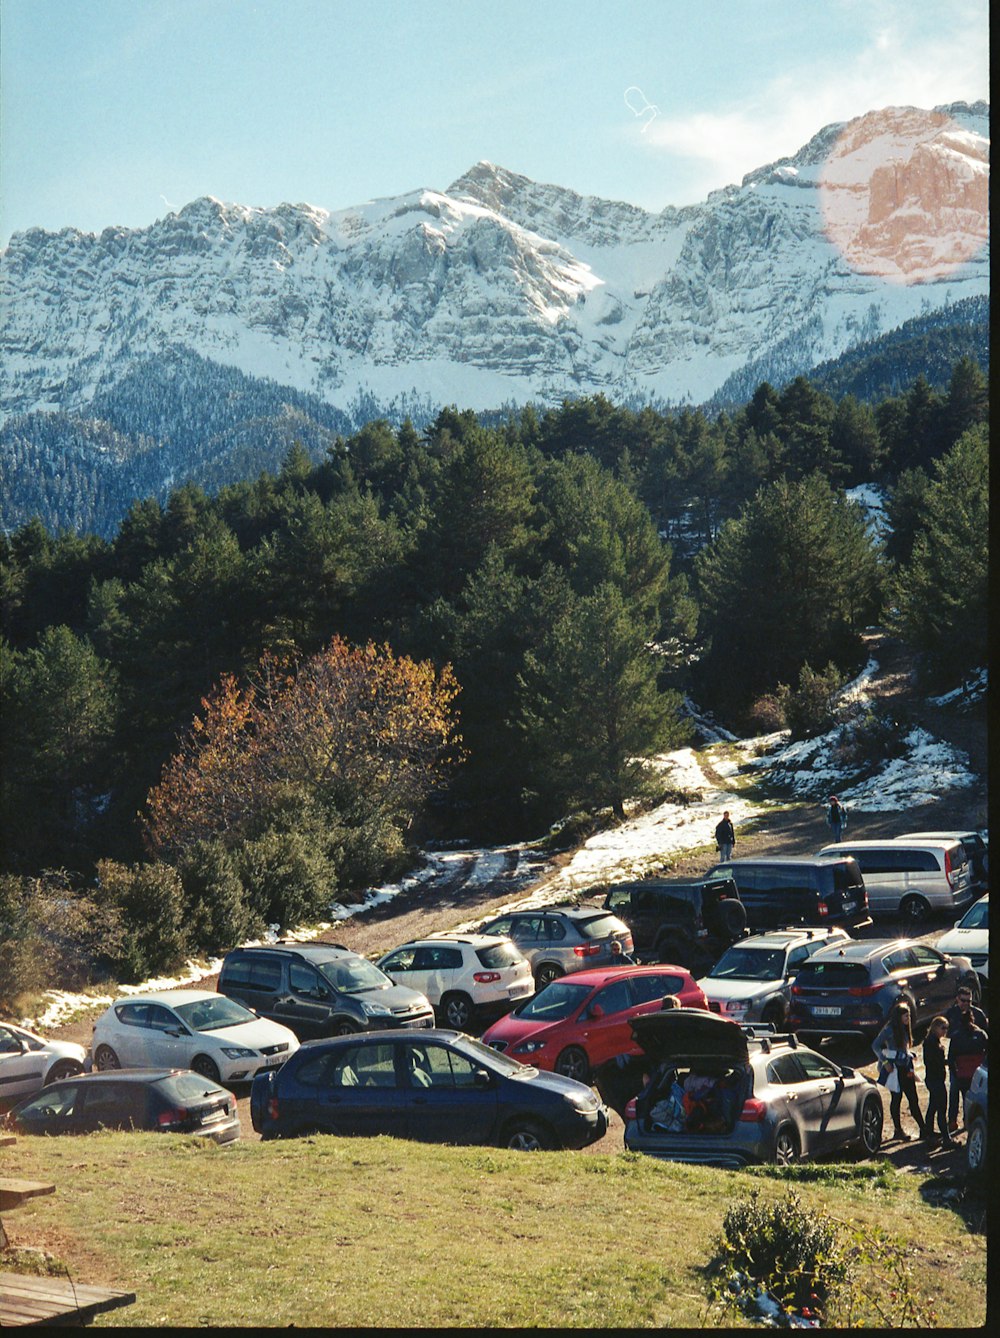 cars parked on parking lot near trees and mountains during daytime